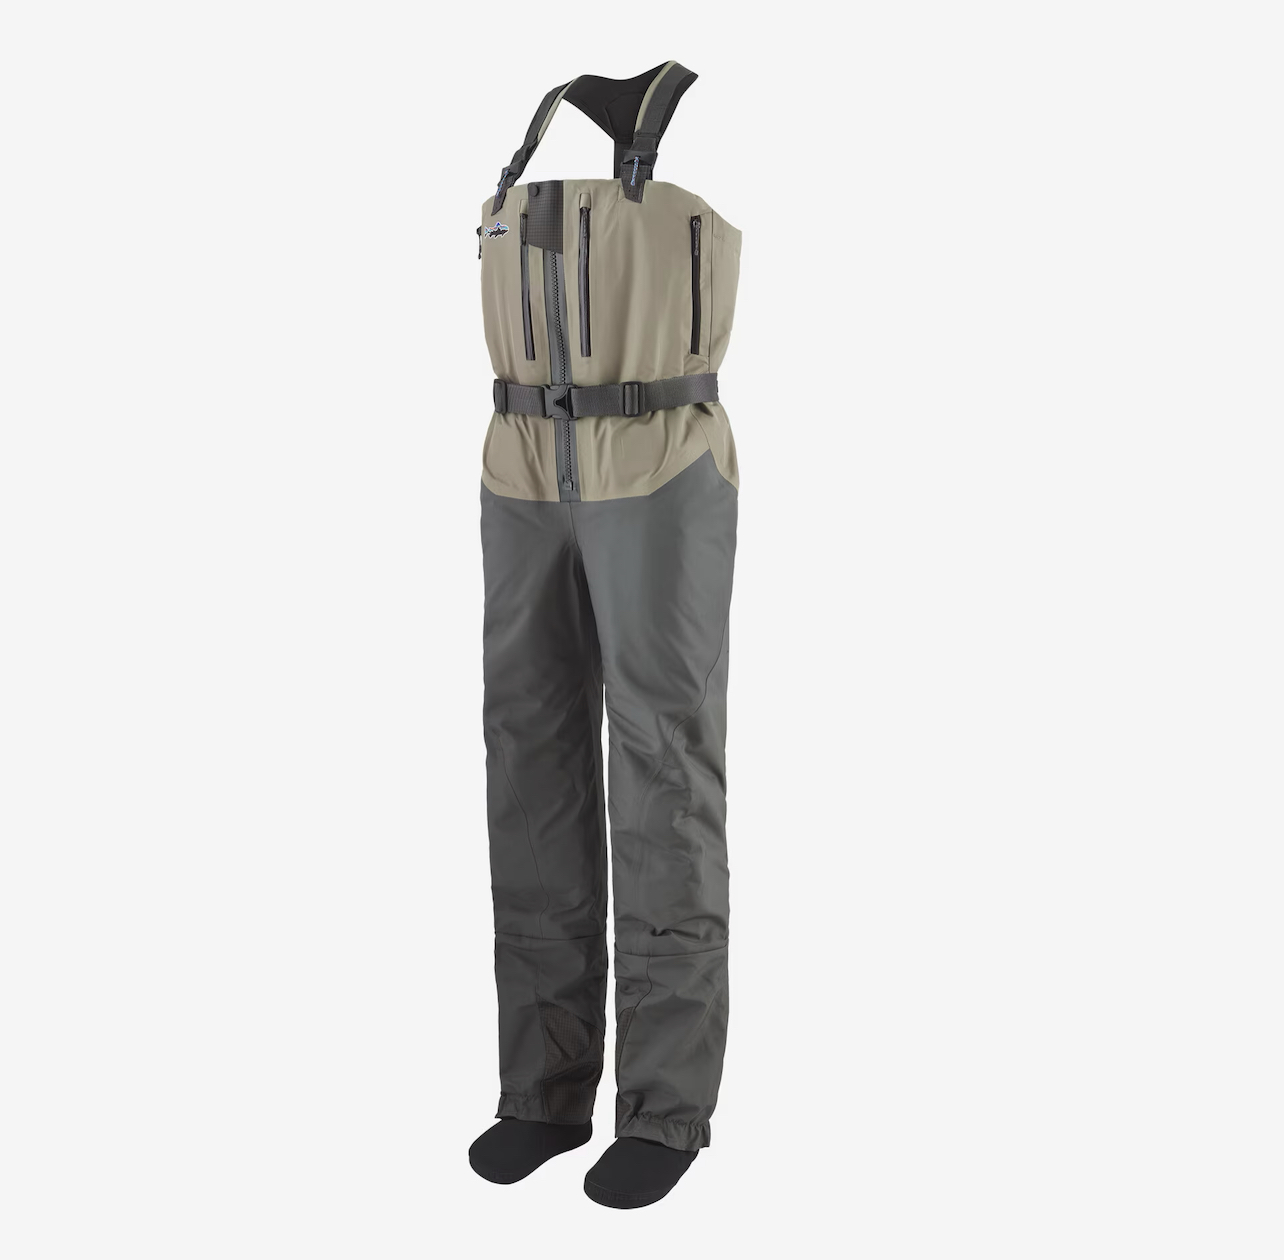 Patagonia Women's Swiftcurrent Expedition Zip-Front Wader